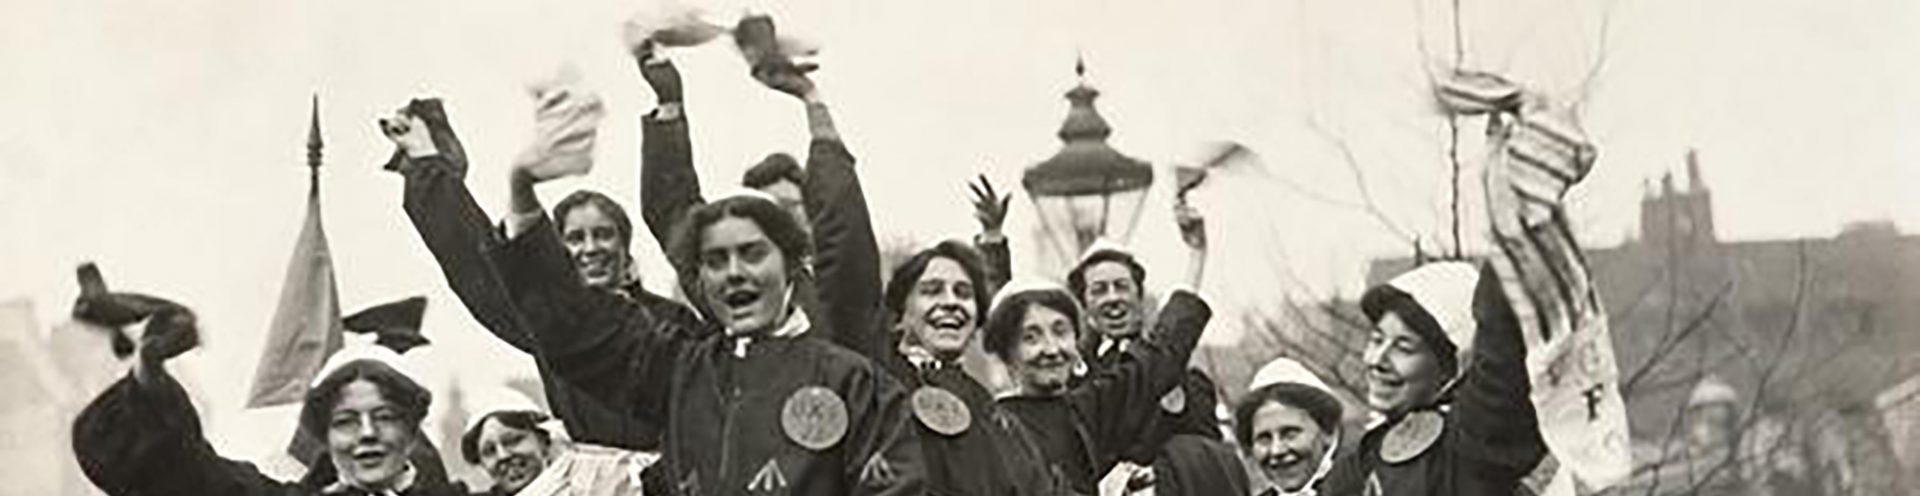 An old picture of women celebrating women's right to vote